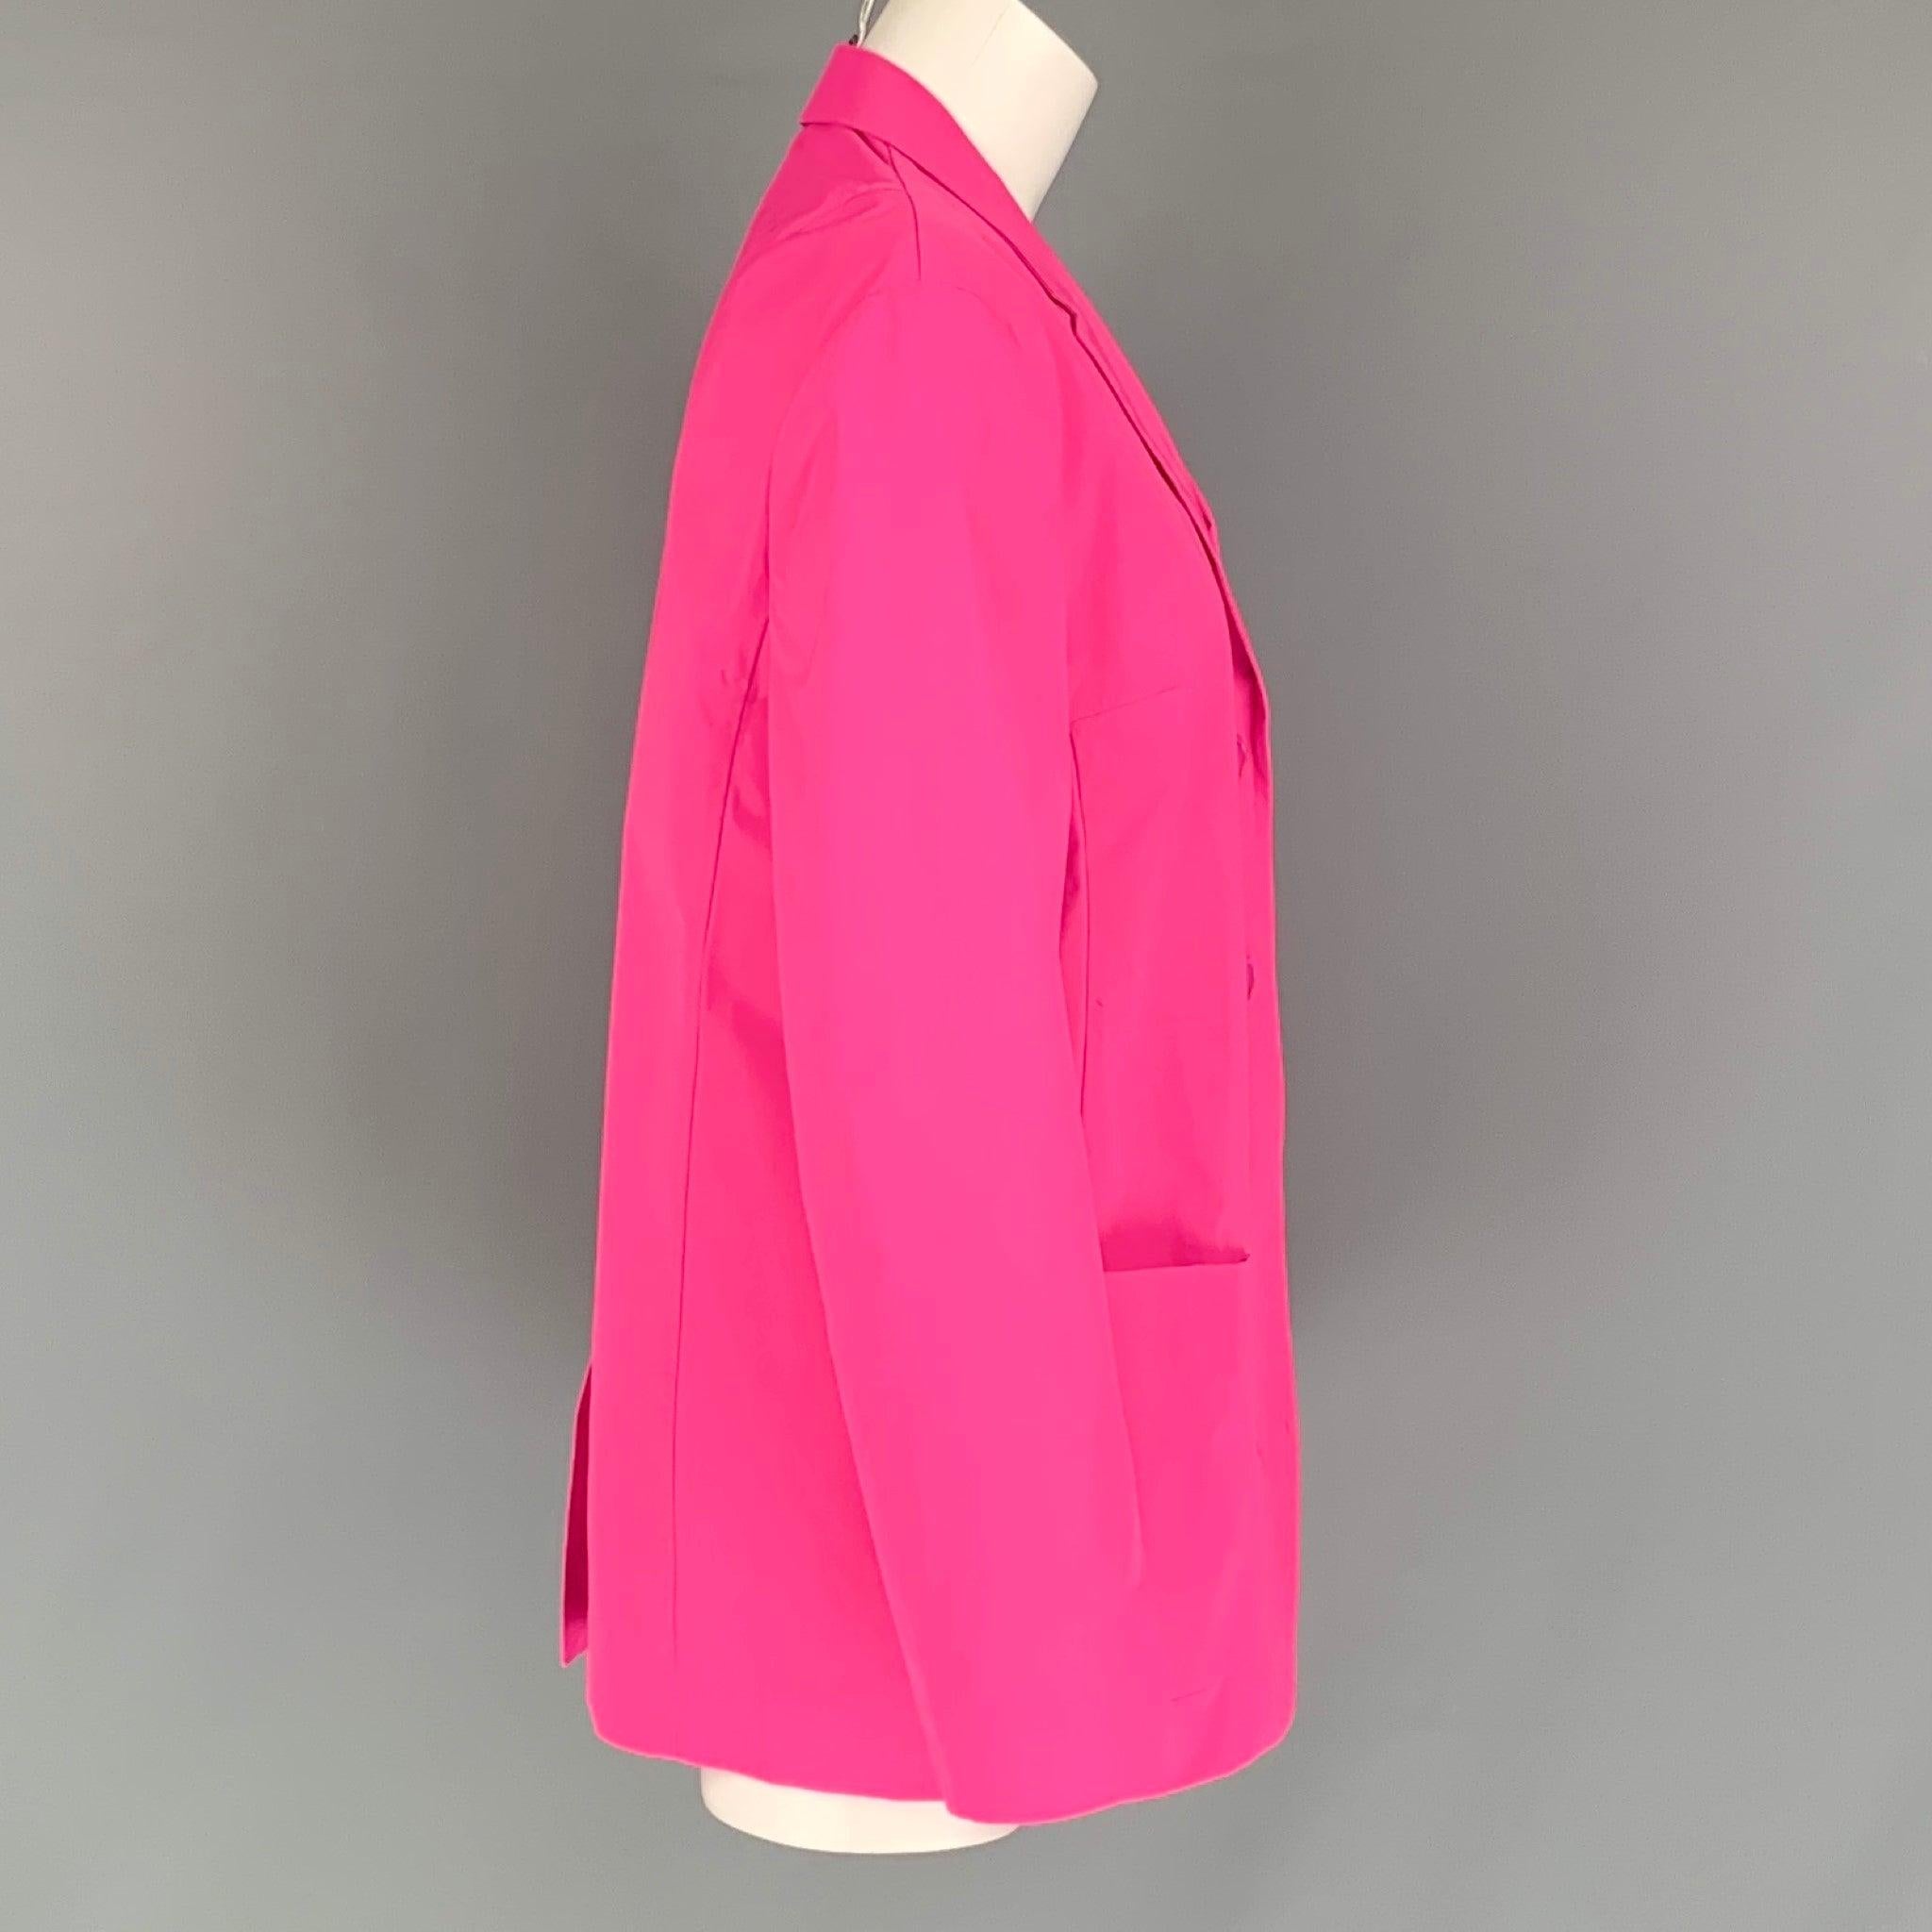 JIL SANDER blazer comes in a pink polyester featuring a notch lapel, patch pocket, single back vent, and a double button closure. Made in Italy. Very Good Pre- Owned Condition. Moderate Marks at Back. 

Marked:   38 

Measurements: 
 
Shoulder: 16.5